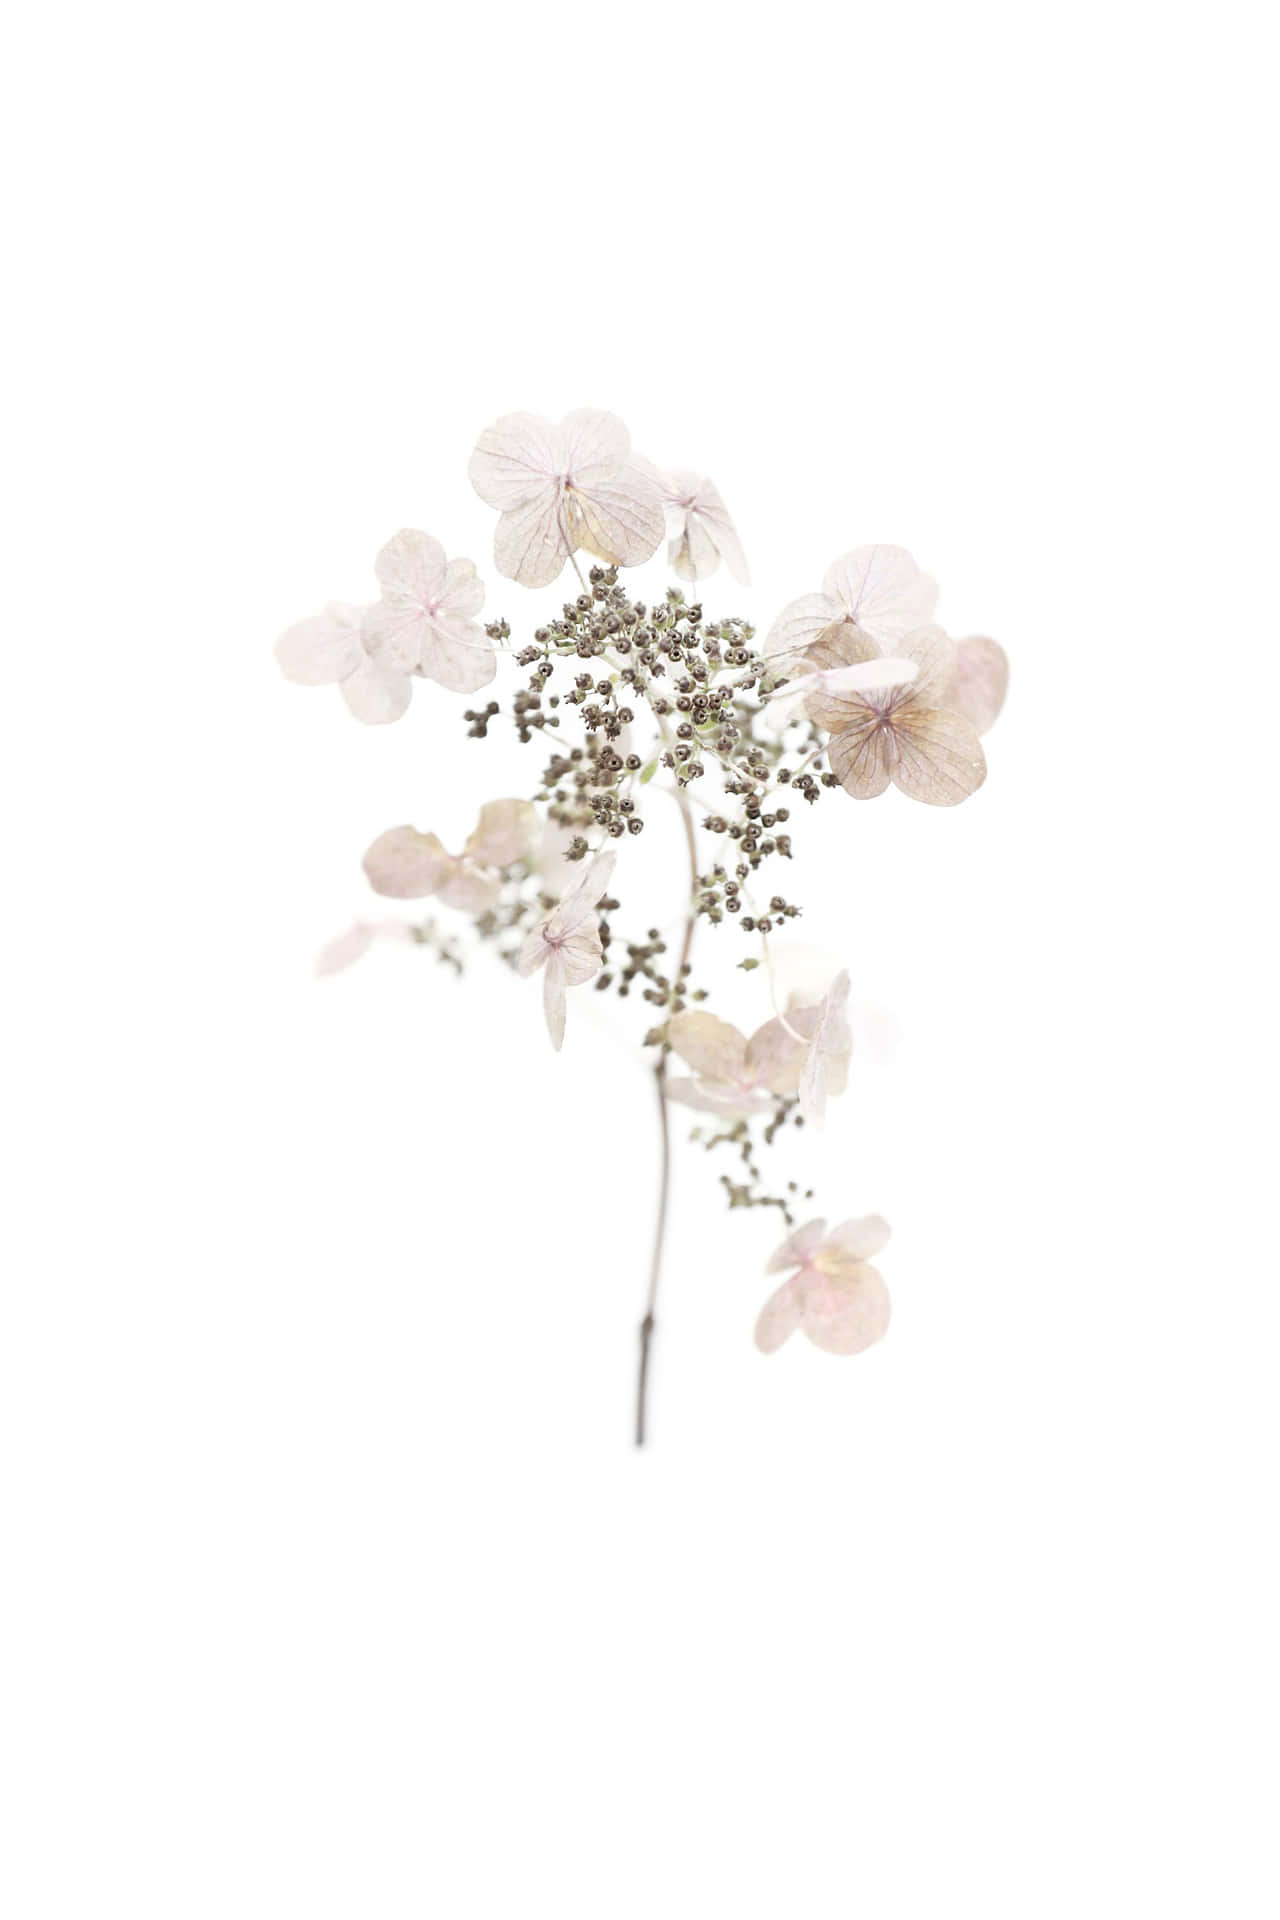 Captivating Collection of Dried Flowers Wallpaper